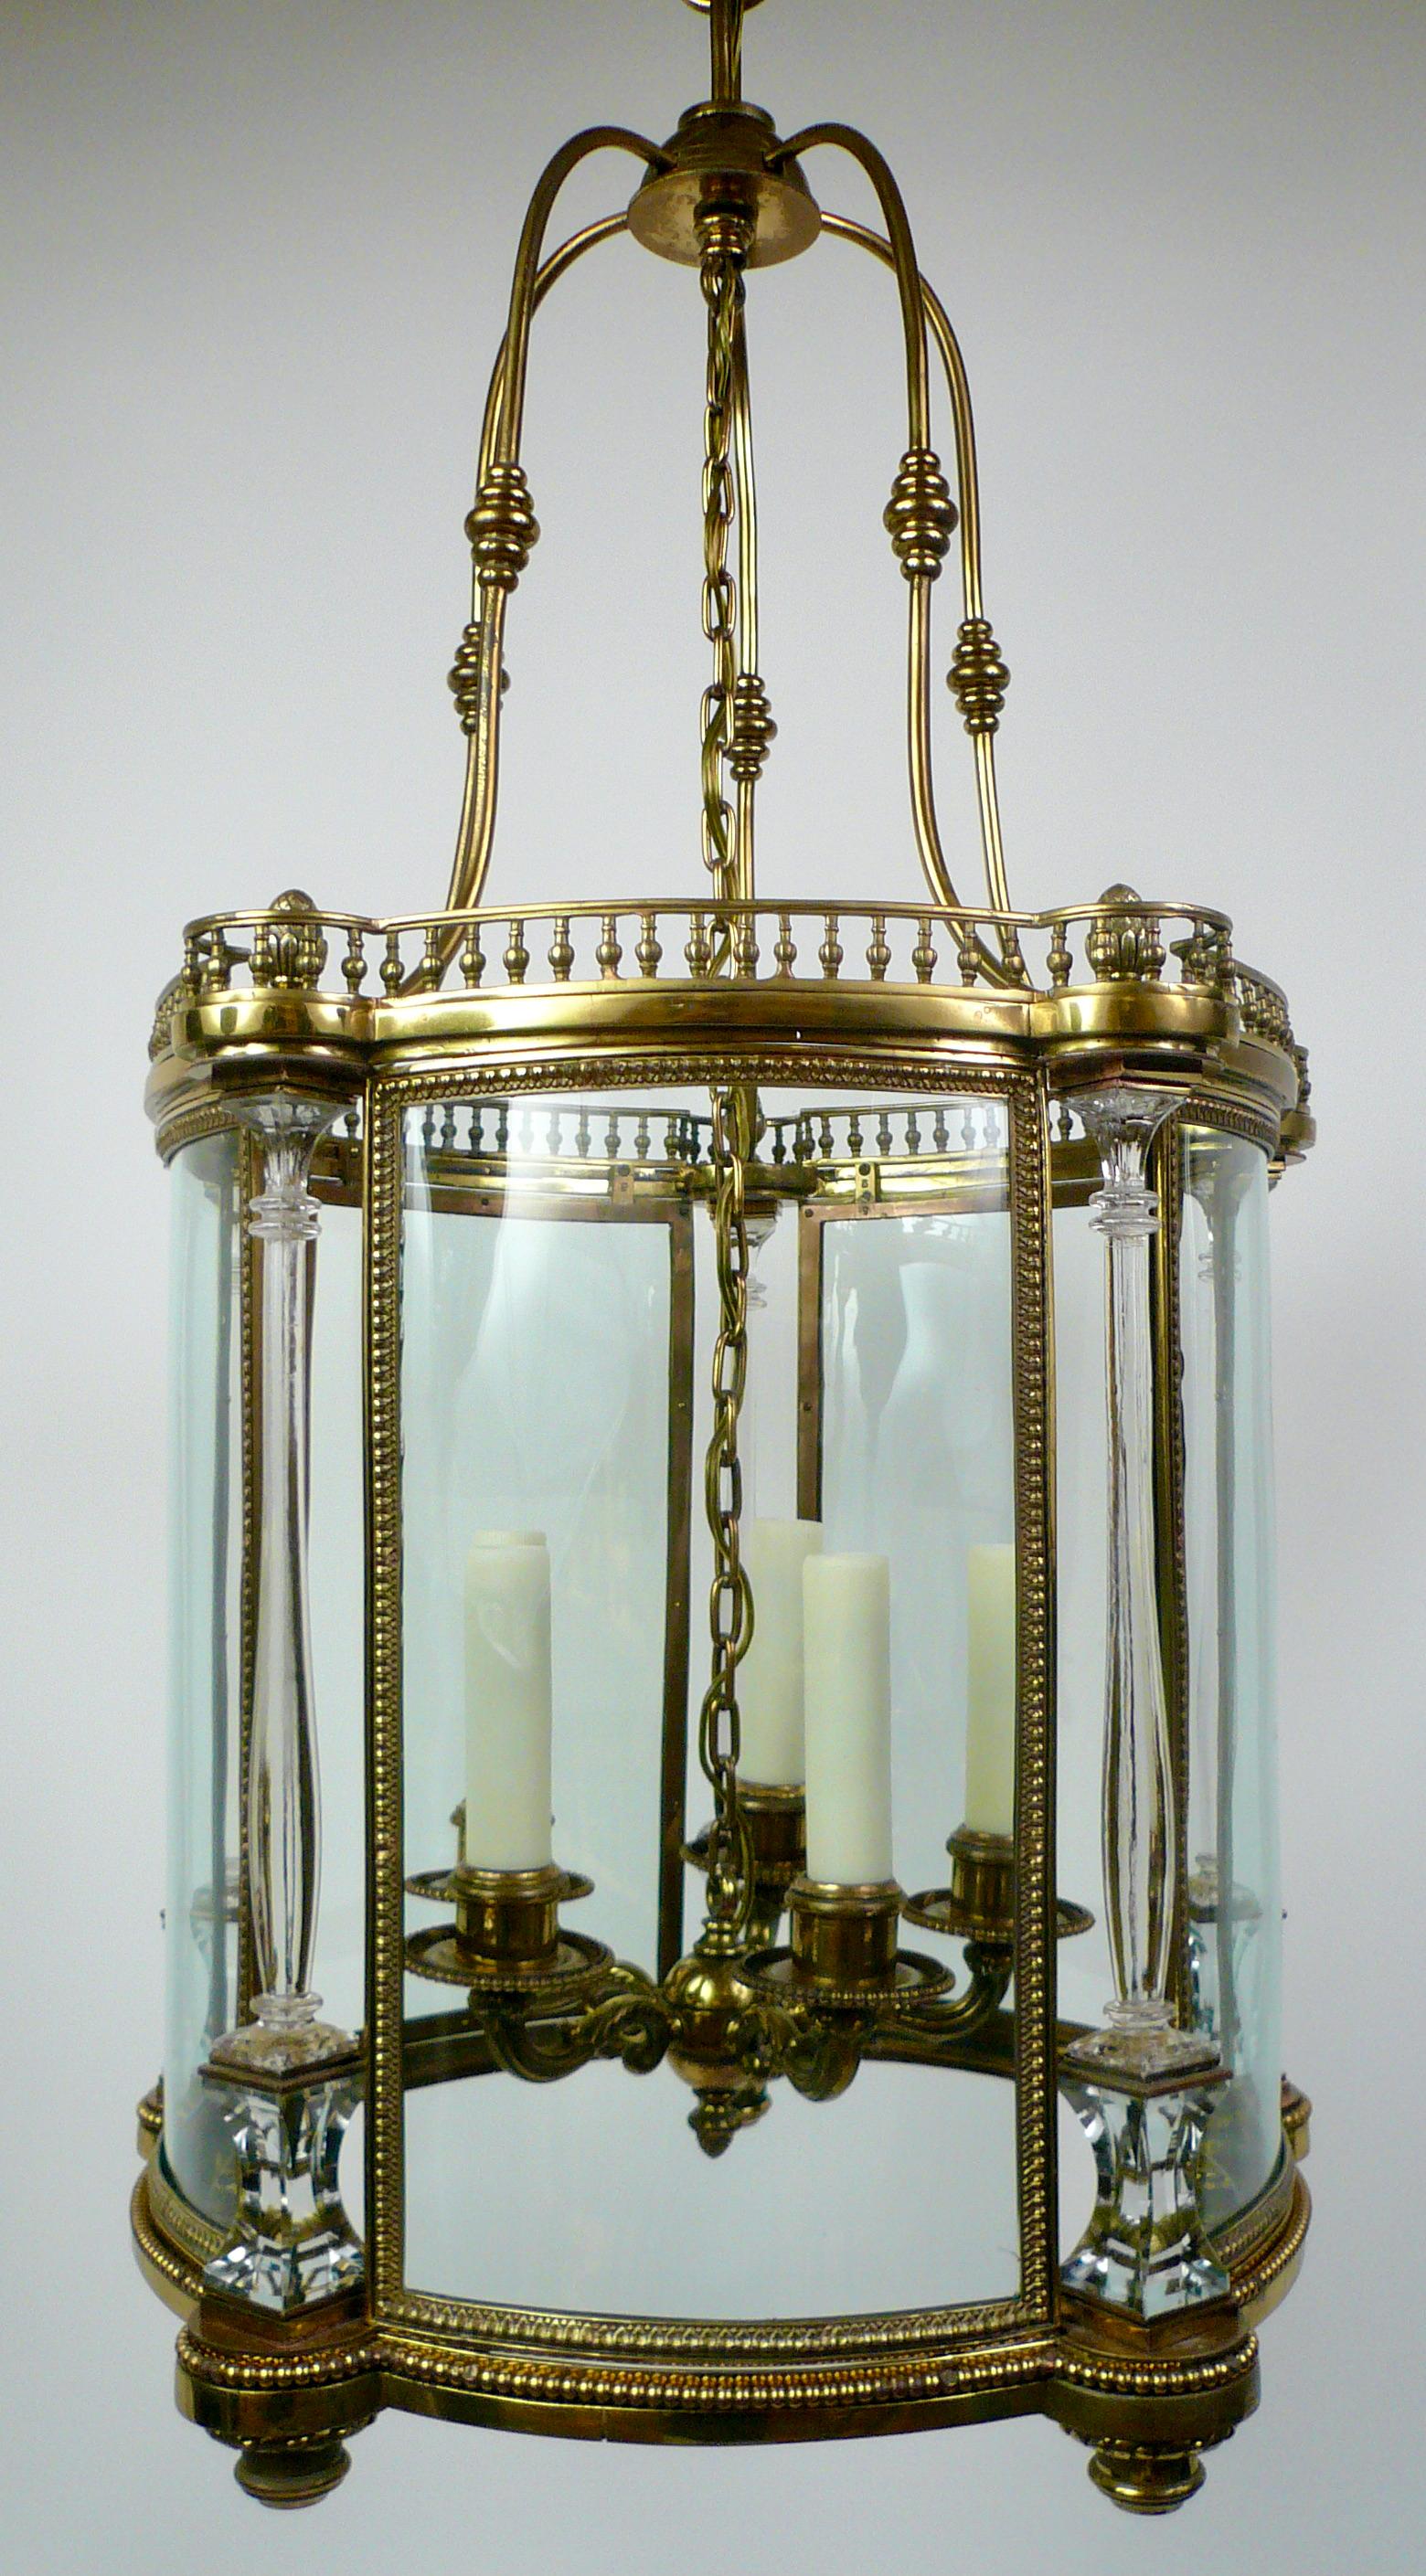 This classical style lantern is beautifully proportioned and of timeless design.
The moulded and cut crystal baluster form columns alternating with curved glass panels are set in a galleried bronze framework.